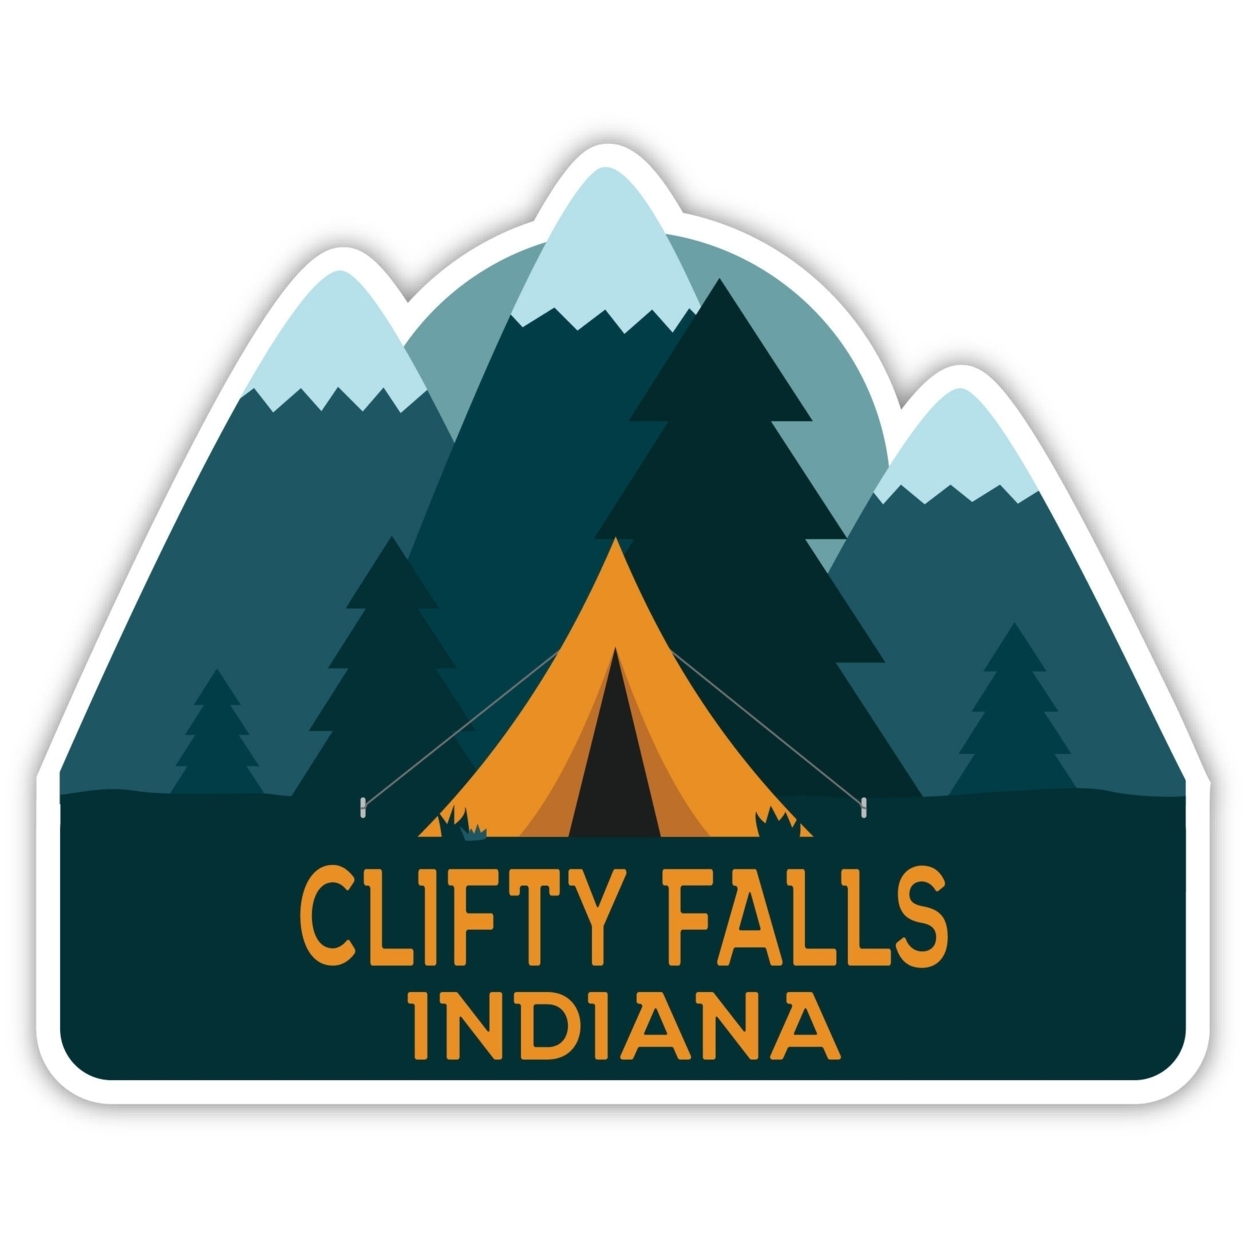 Clifty Falls Indiana Souvenir Decorative Stickers (Choose Theme And Size) - Single Unit, 6-Inch, Tent